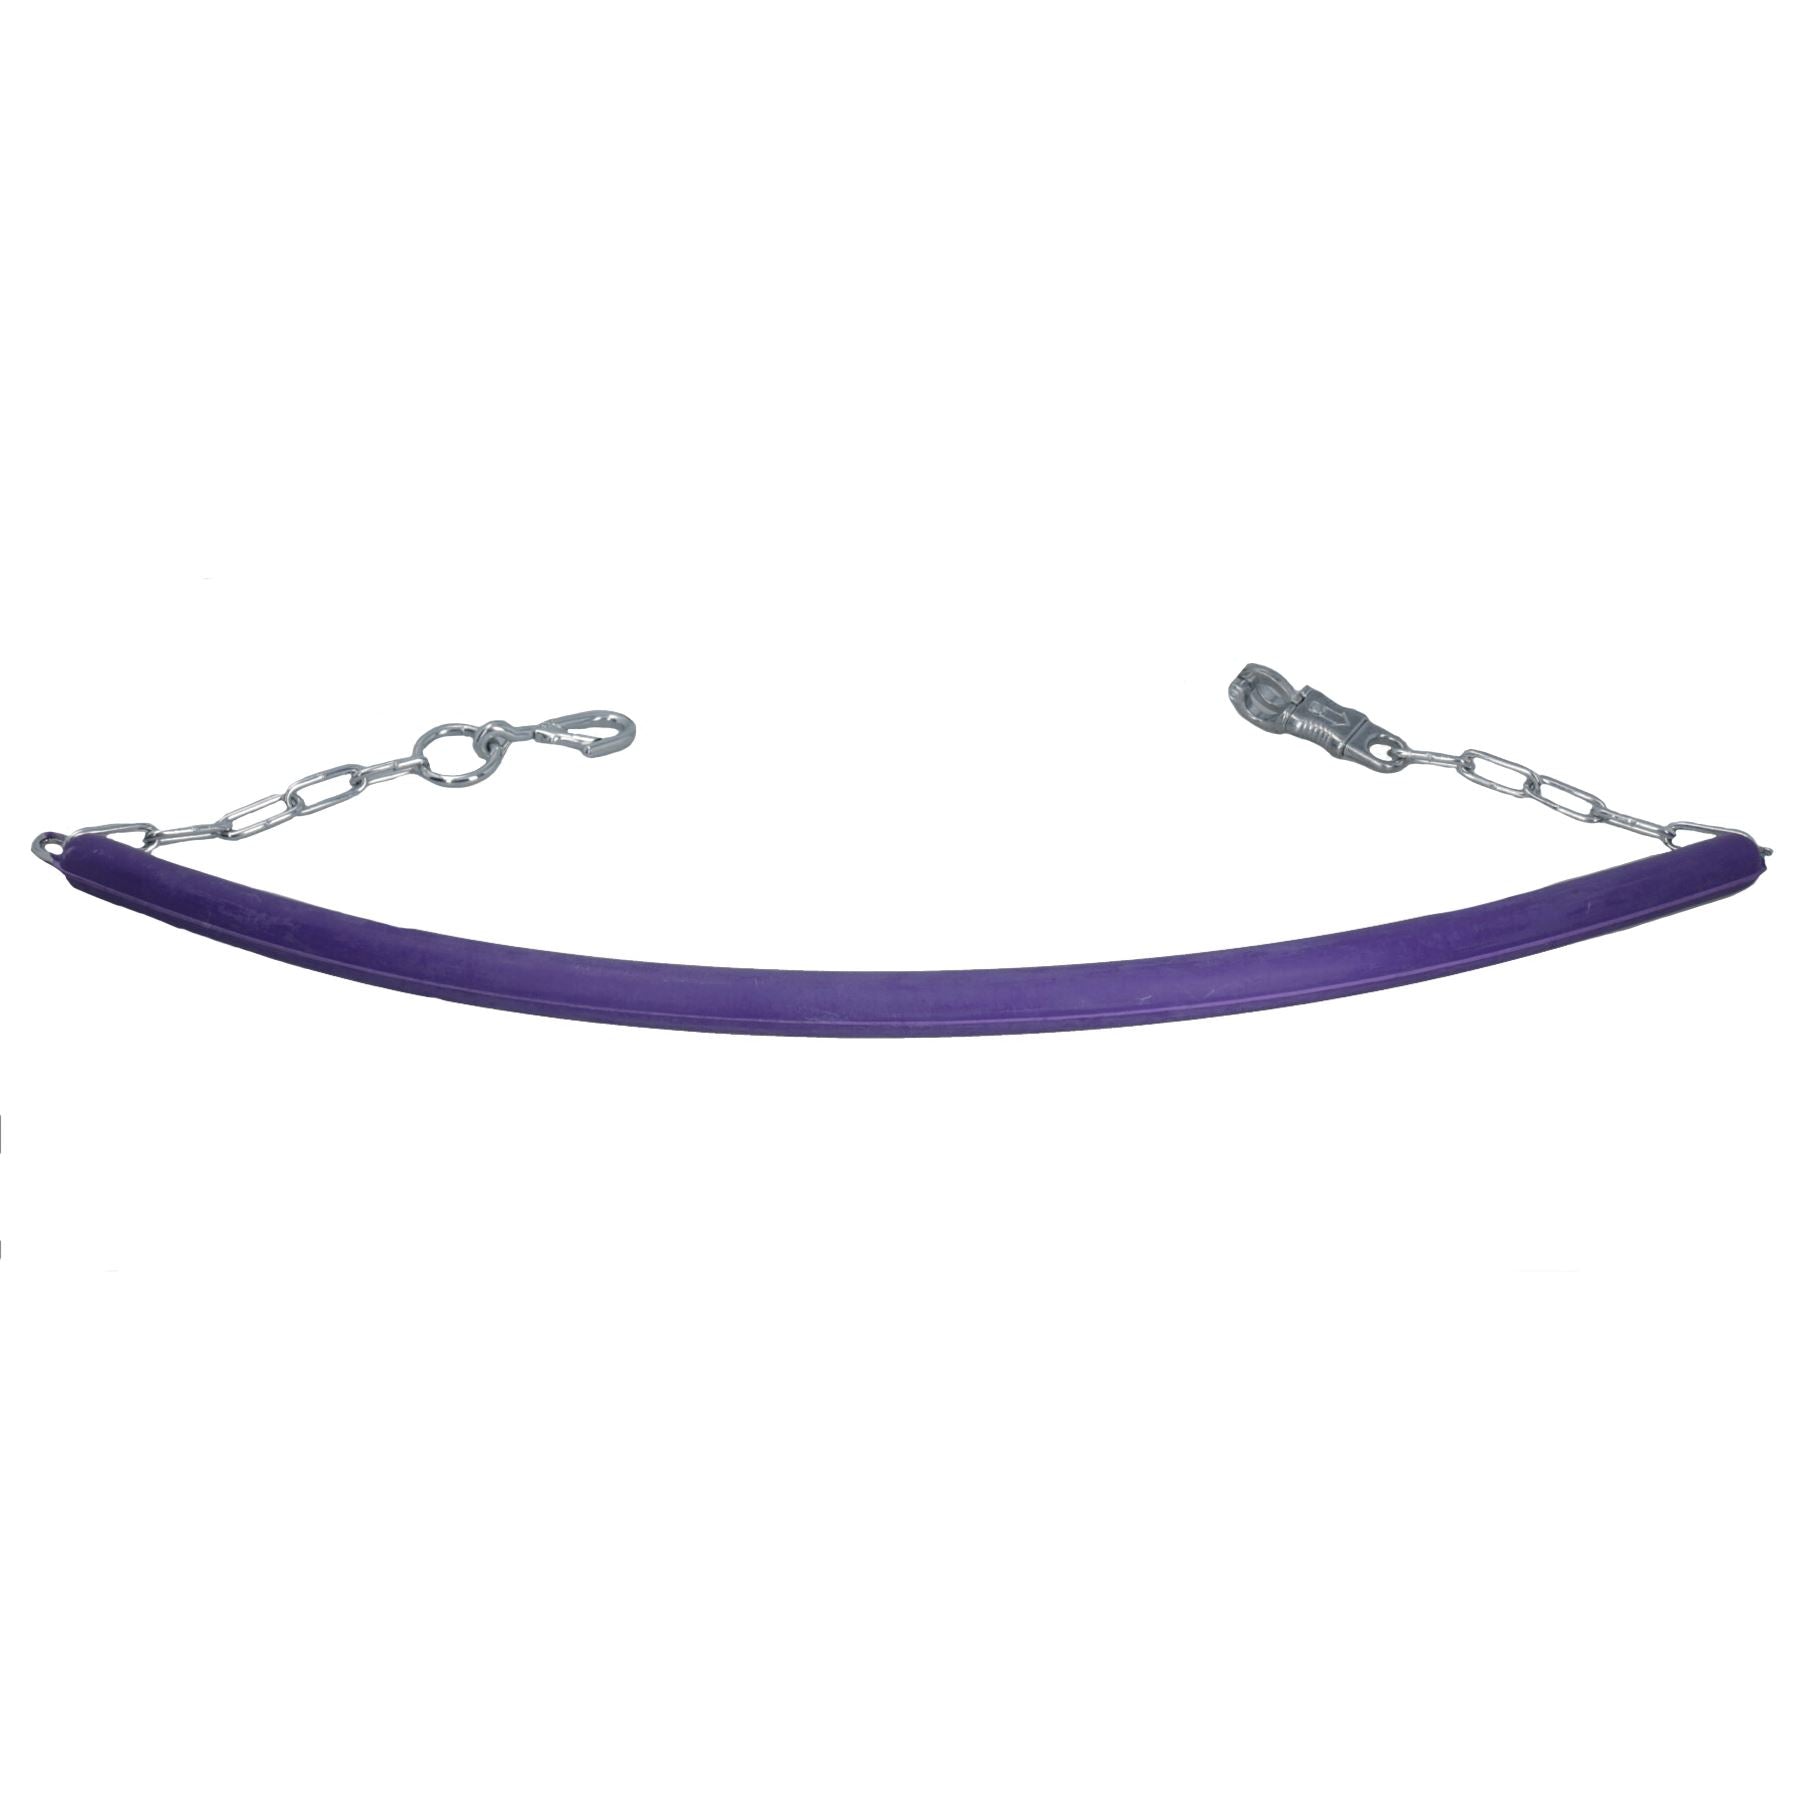 1 Heavy Duty Purple Rubber Coated Equestrian Horse Stable & Stall Chains